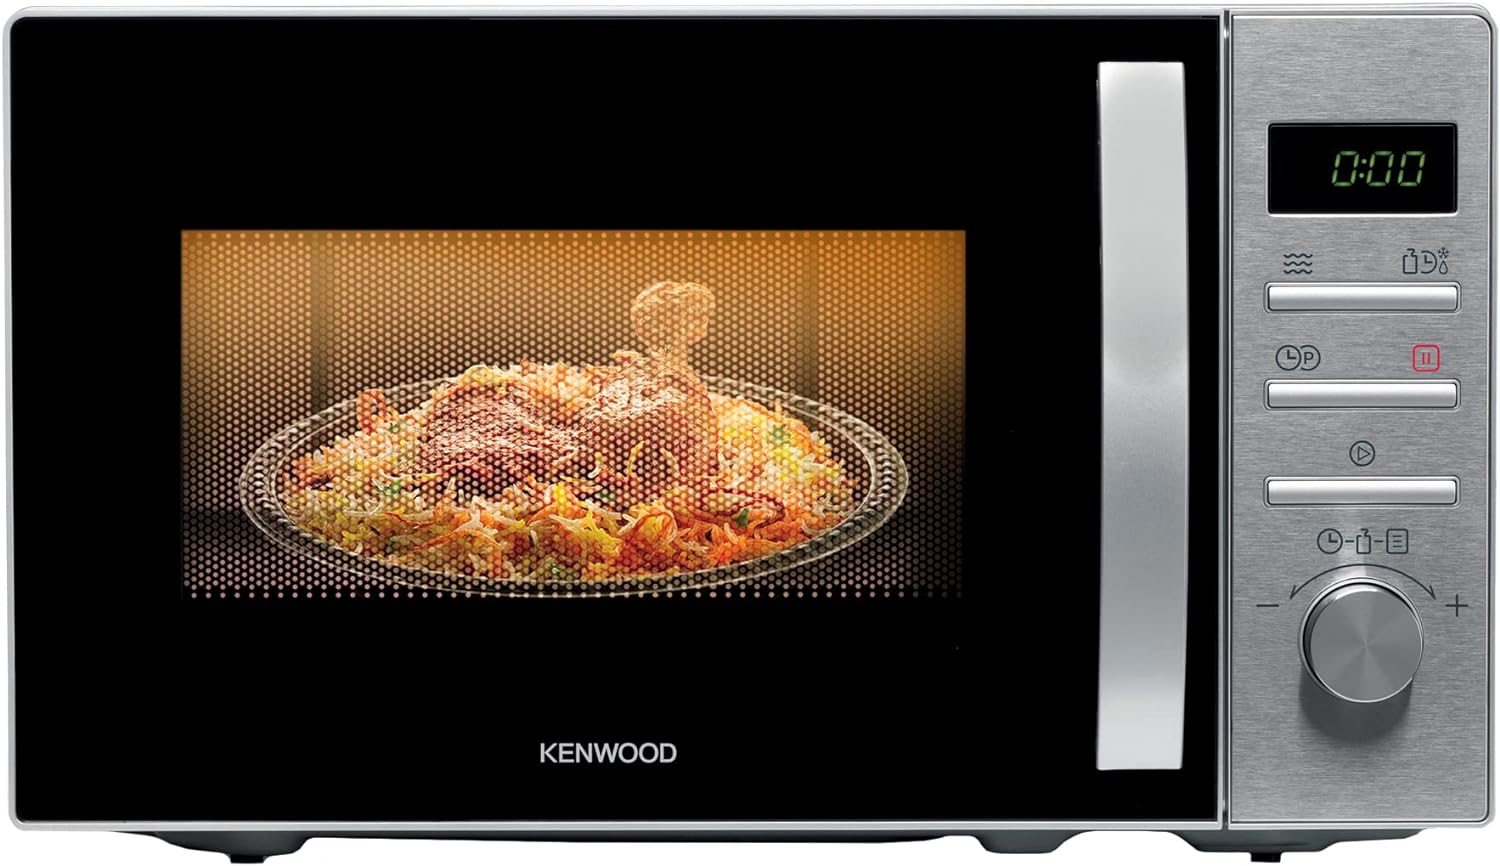 Kenwood 22L Microwave Oven 700W - MWM22 | Supply Master Accra, Ghana Kitchen Appliances Buy Tools hardware Building materials